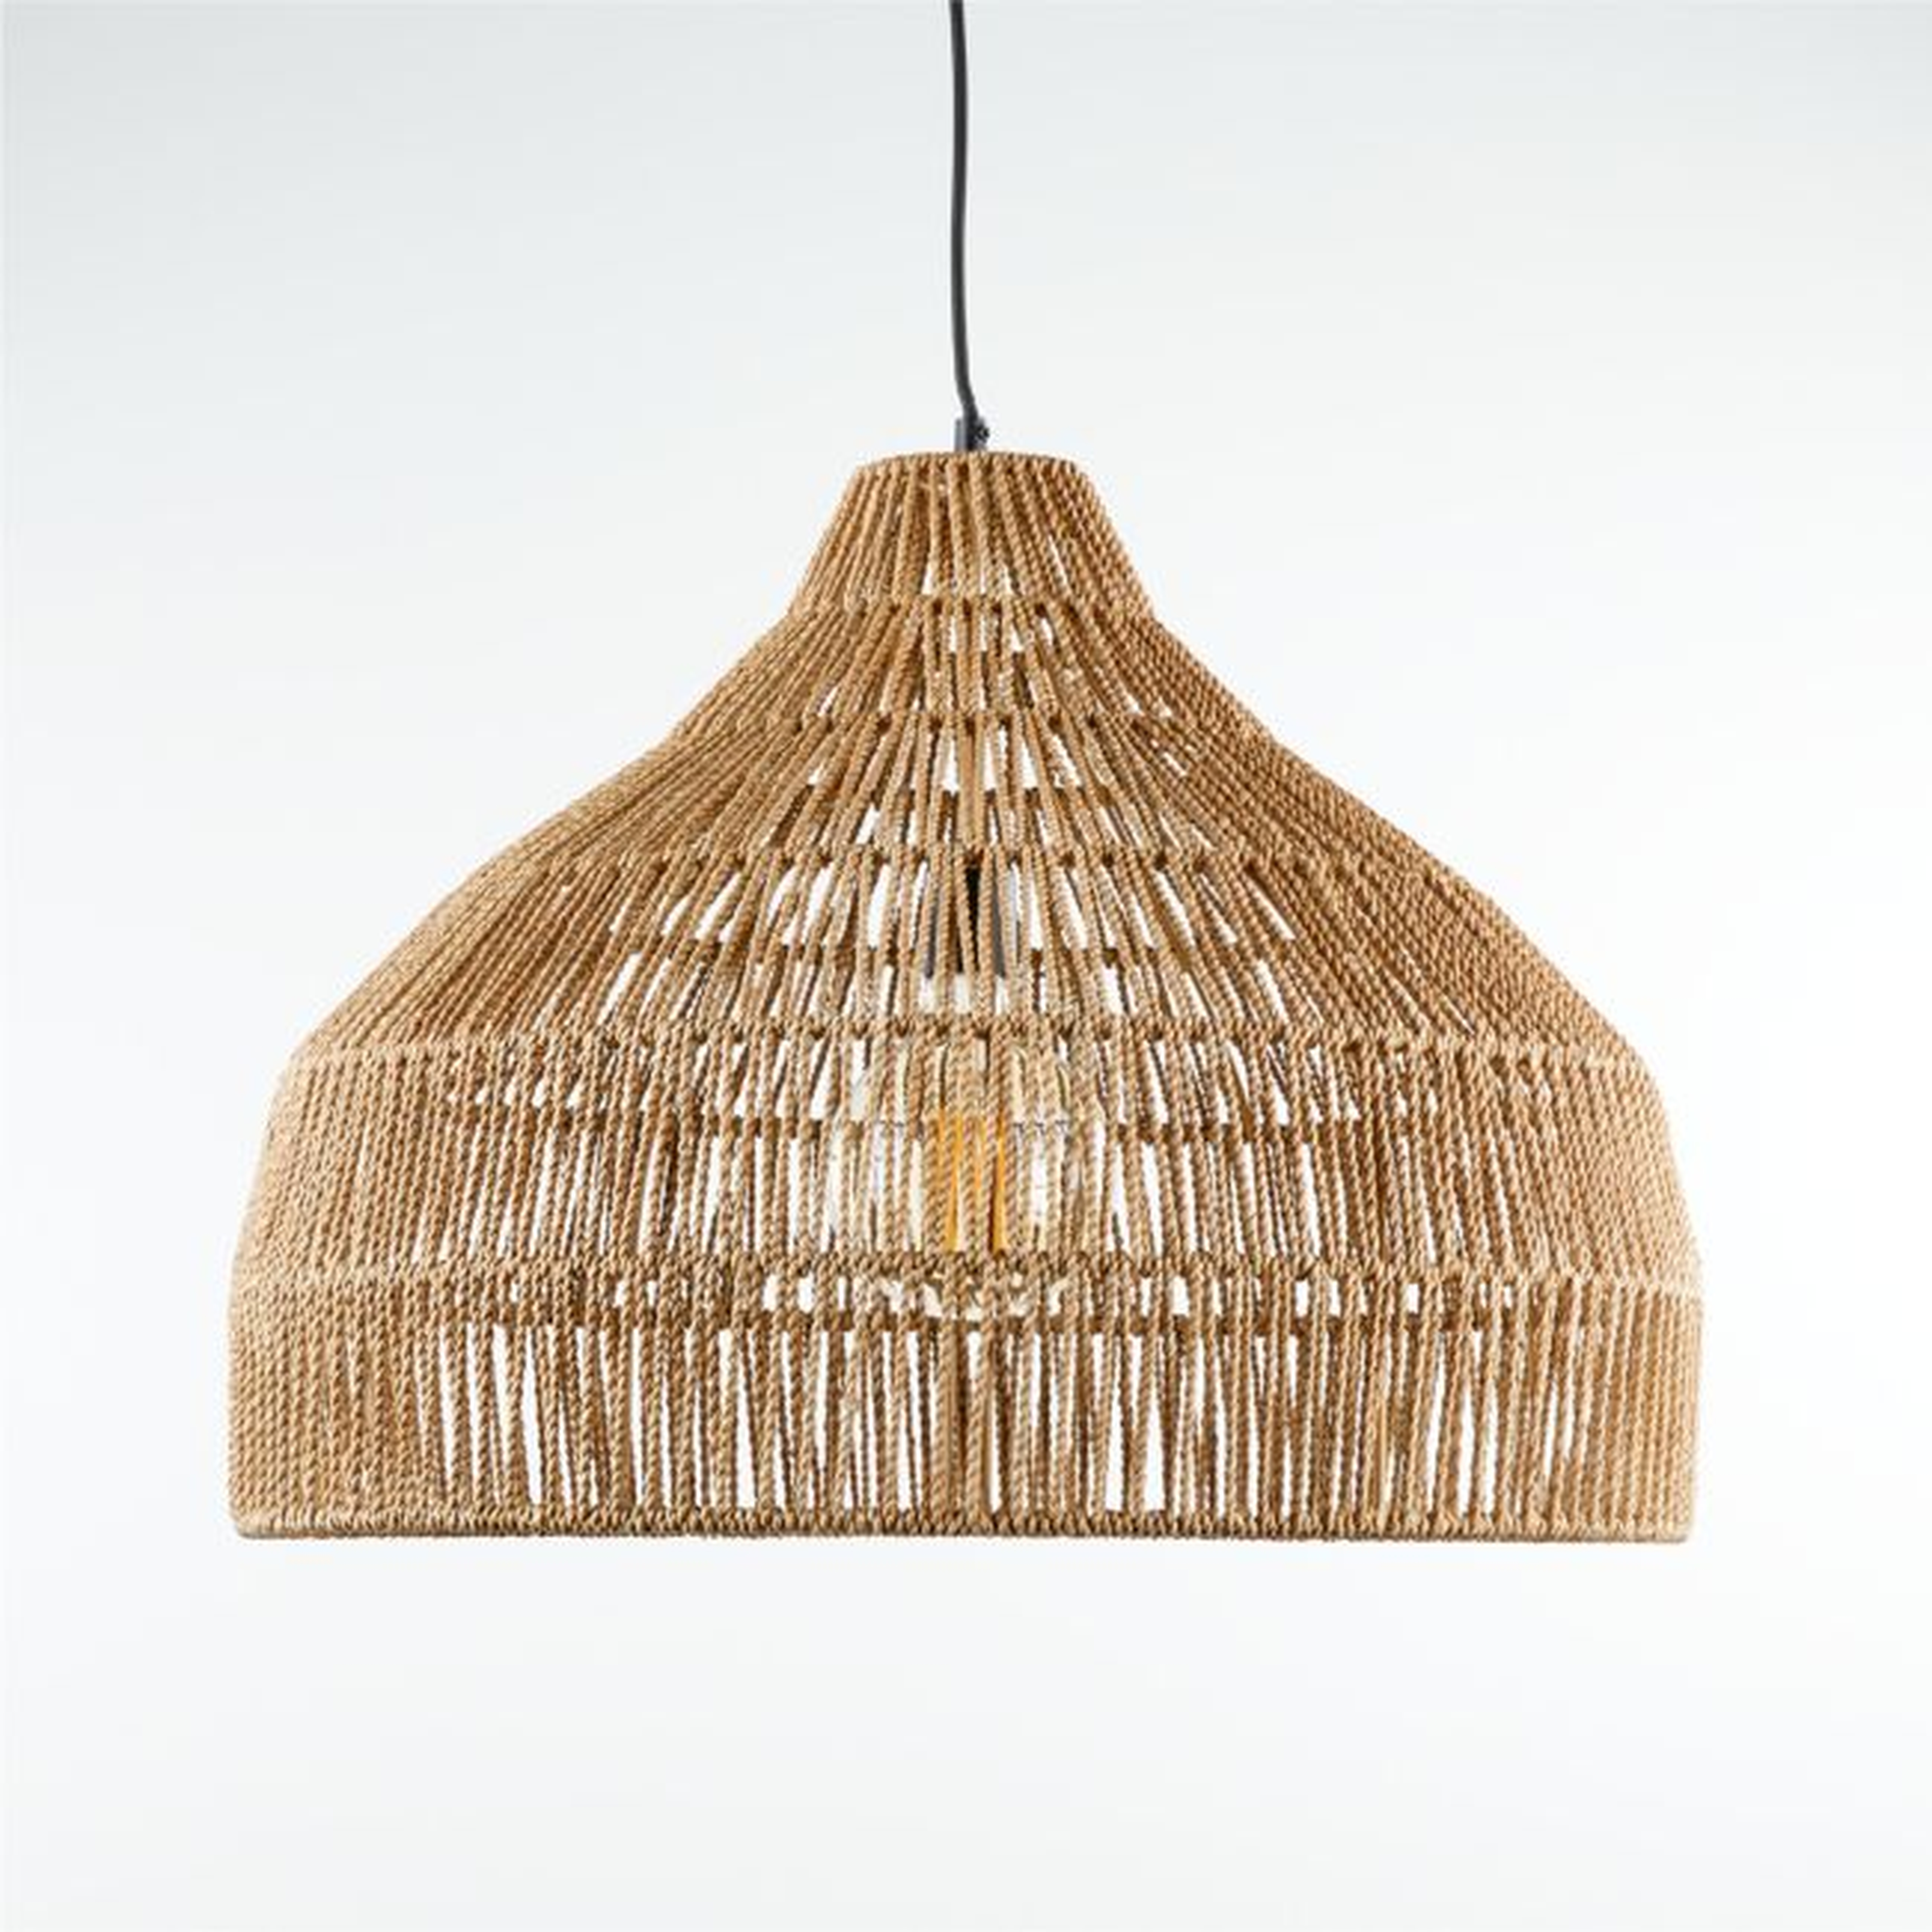 Cabo Large Woven Pendant Light - Crate and Barrel